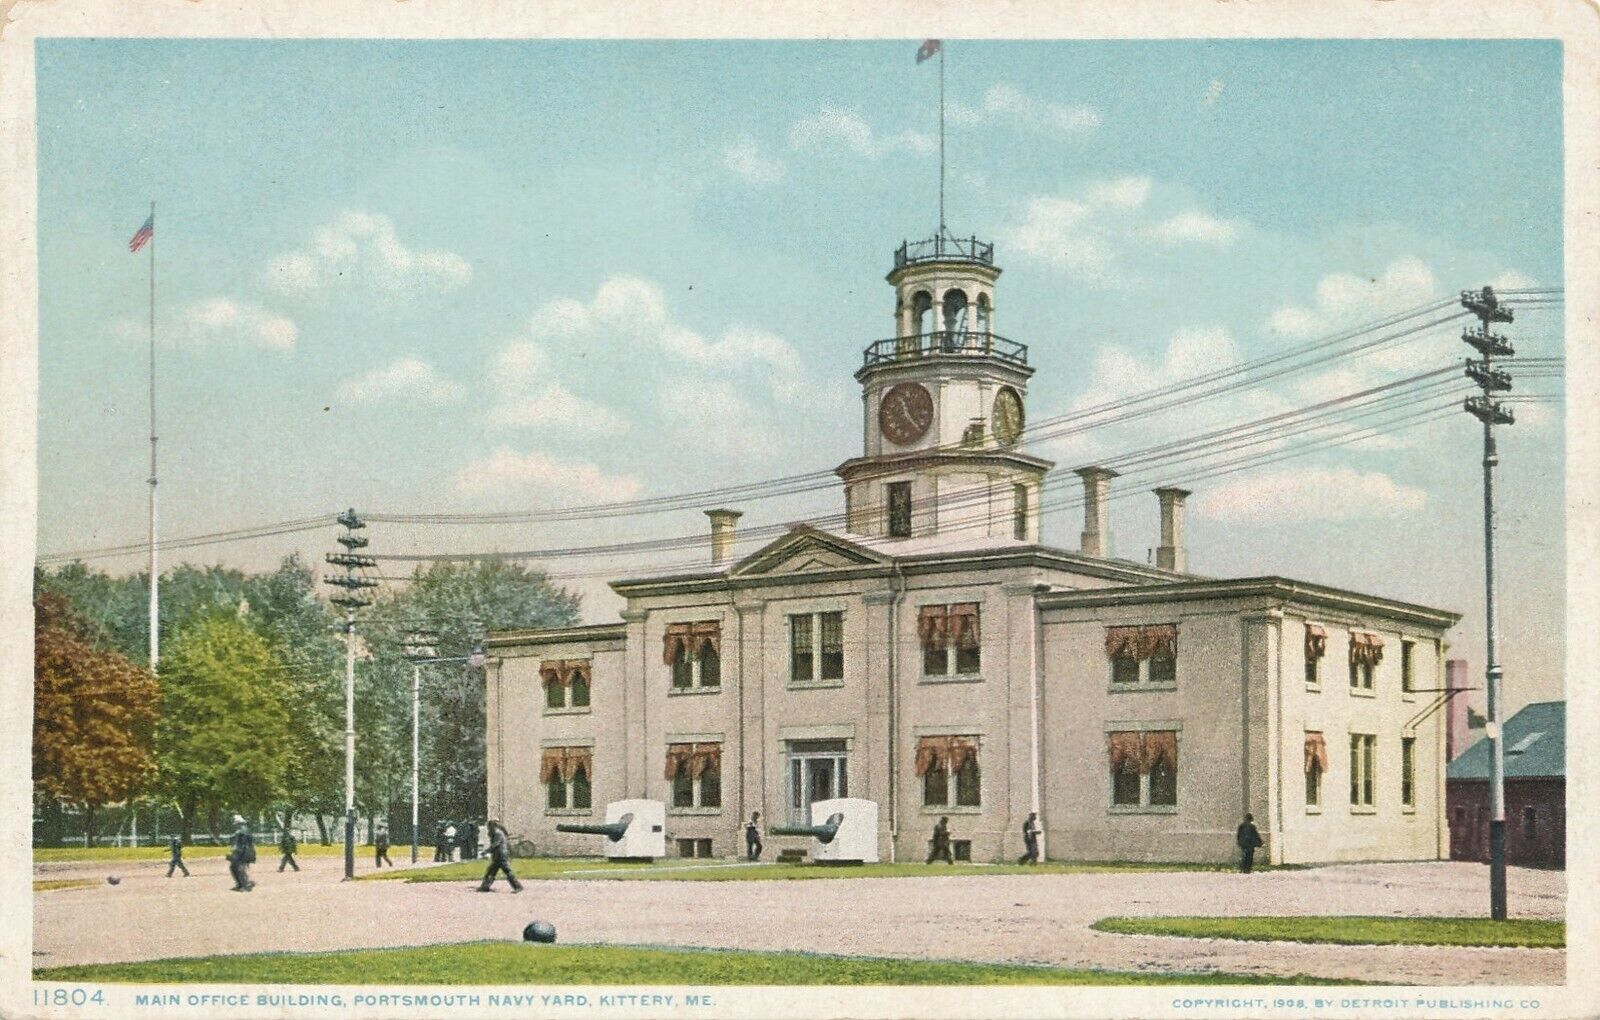 KITTERY ME – Portsmouth Navy Yard Main Office Building